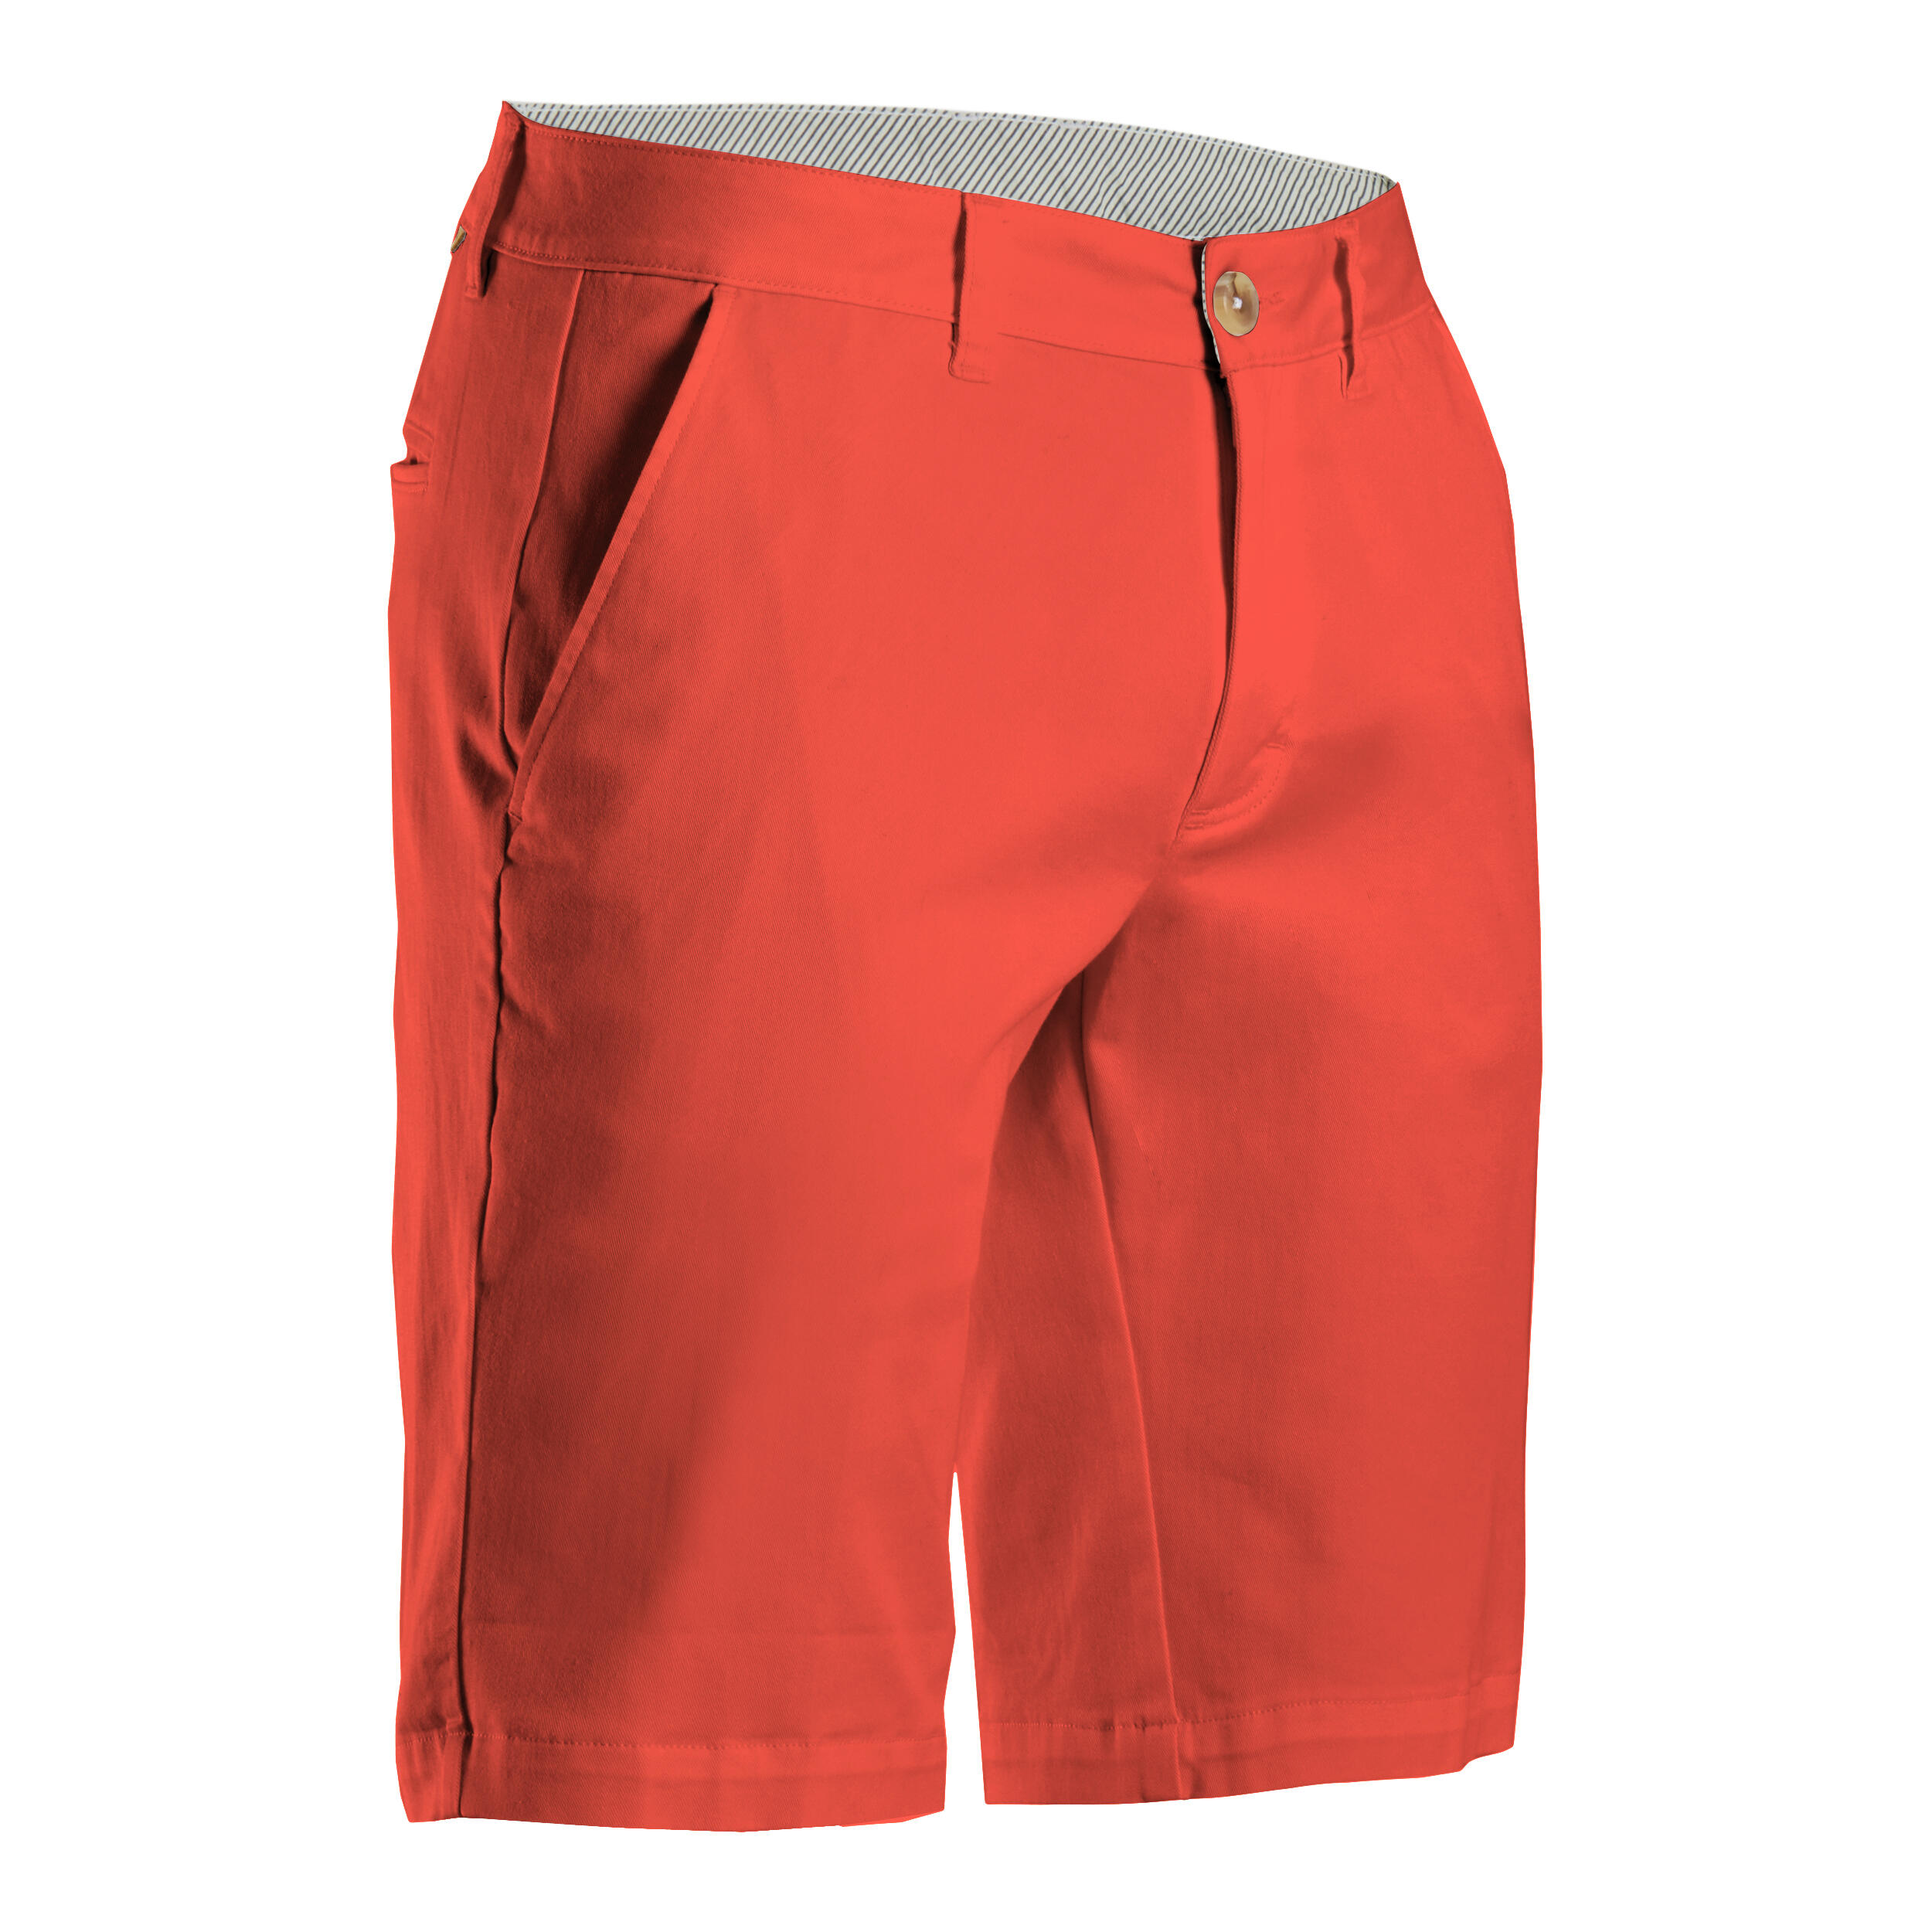 INESIS Men's golf chino shorts - MW500 coral red